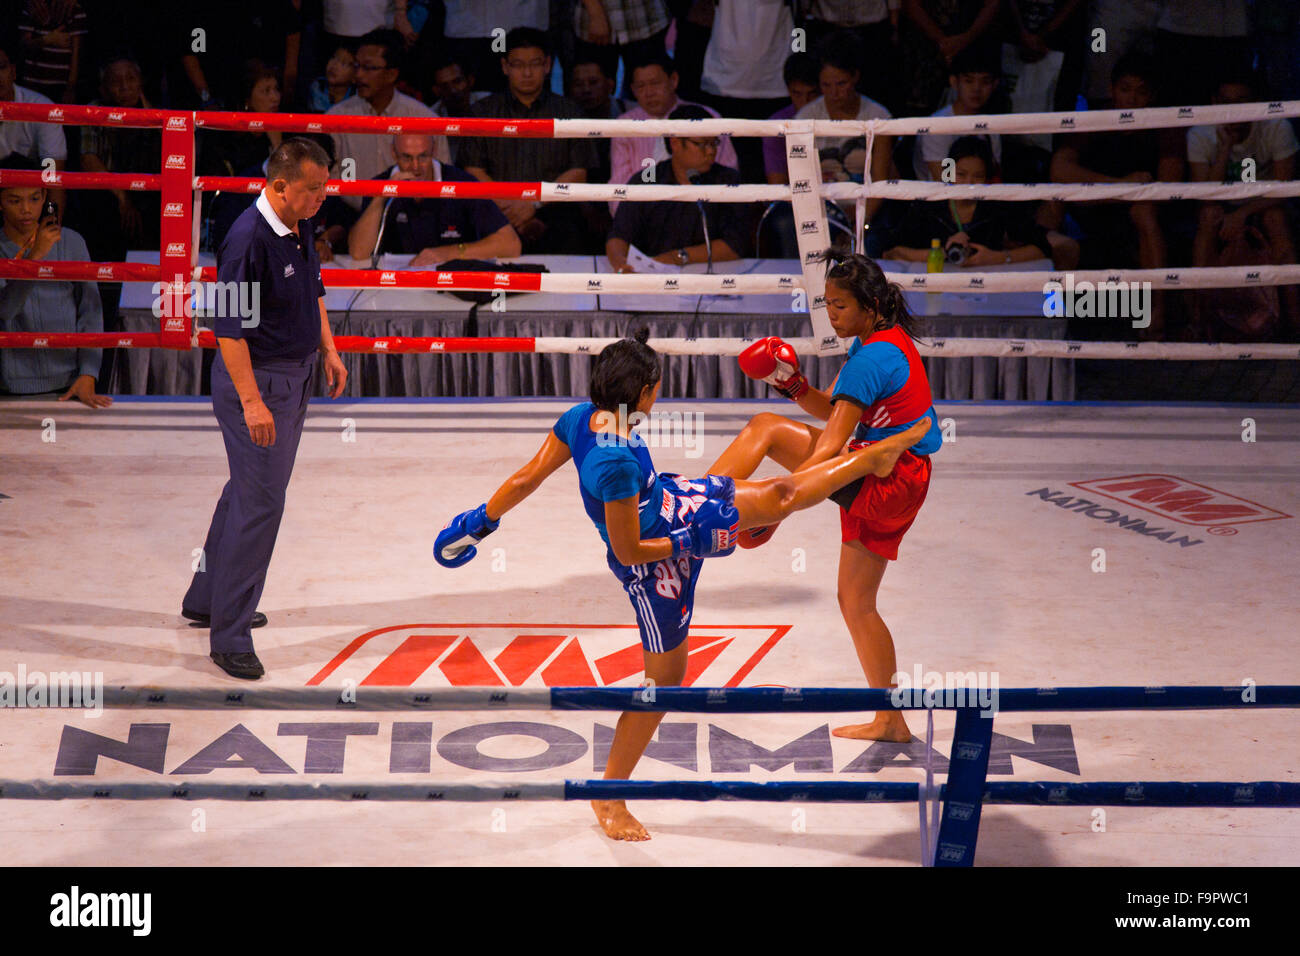 Female muay thai kickboxer in blue kick jab kicking oppenent is blocked by the arm as male referee officiates at amateur outdoor Stock Photo